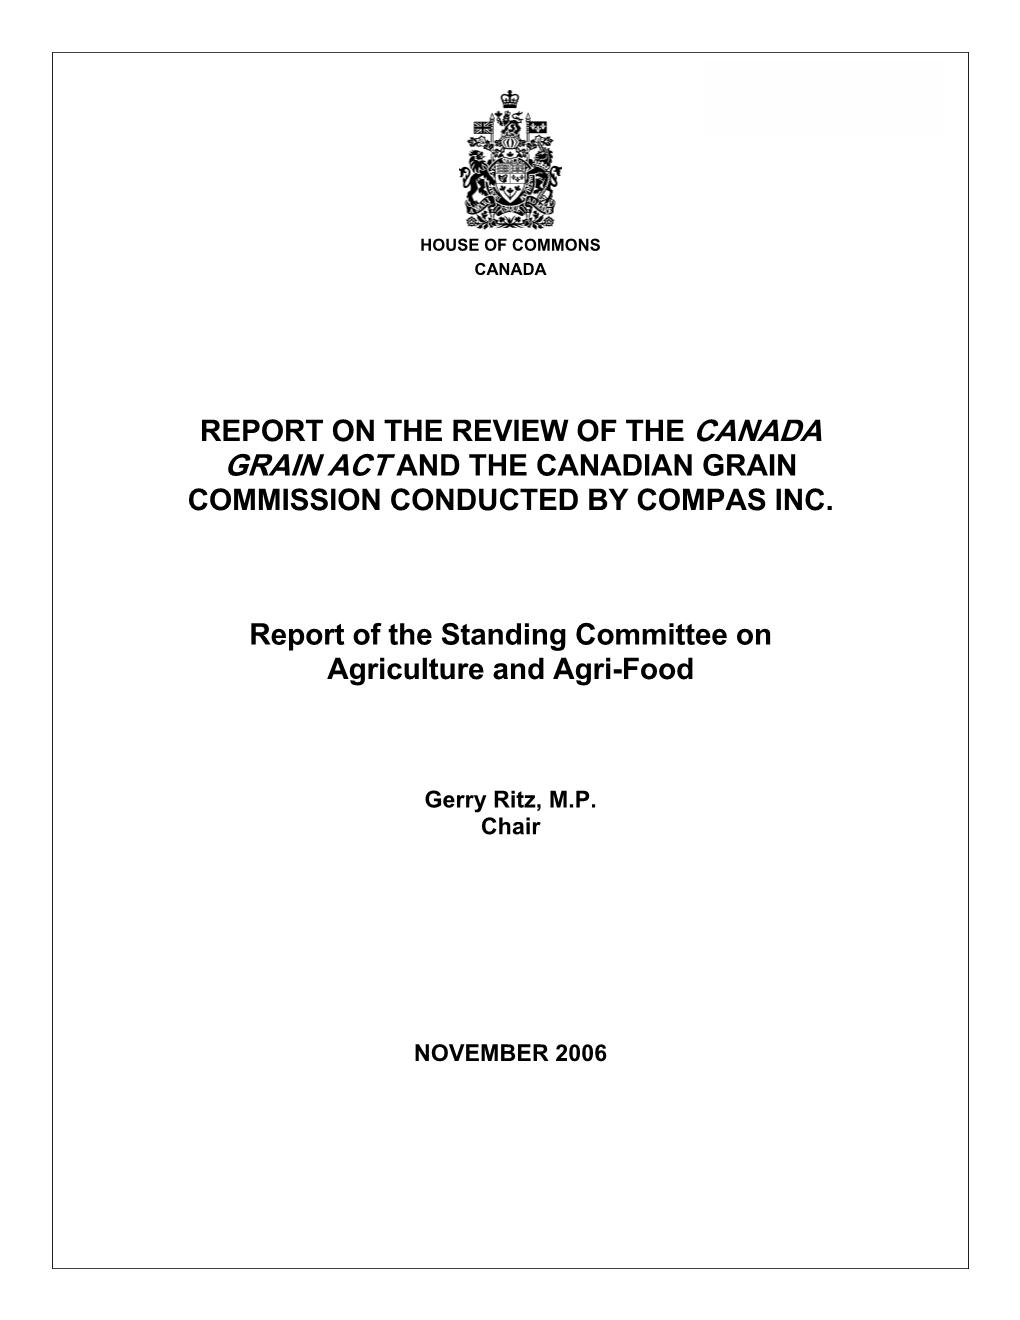 Report on the Review of the Canada Grain Act and the Canadian Grain Commission Conducted by Compas Inc